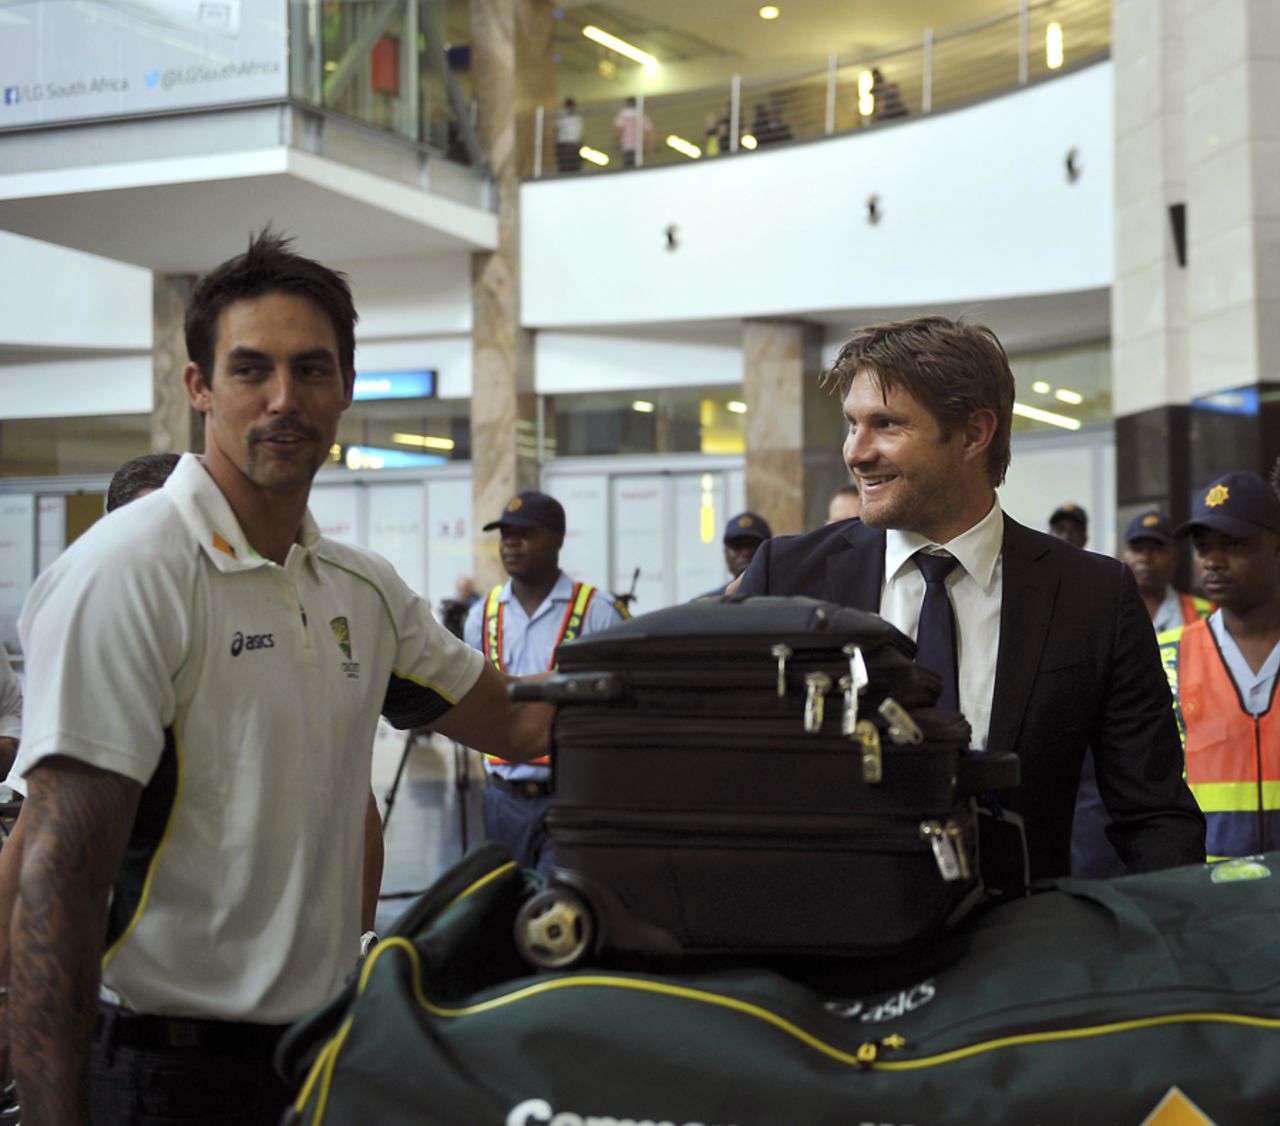 Mitchell Johnson and Shane Watson arrive for the South Africa tour, Johannesburg, January 29, 2014